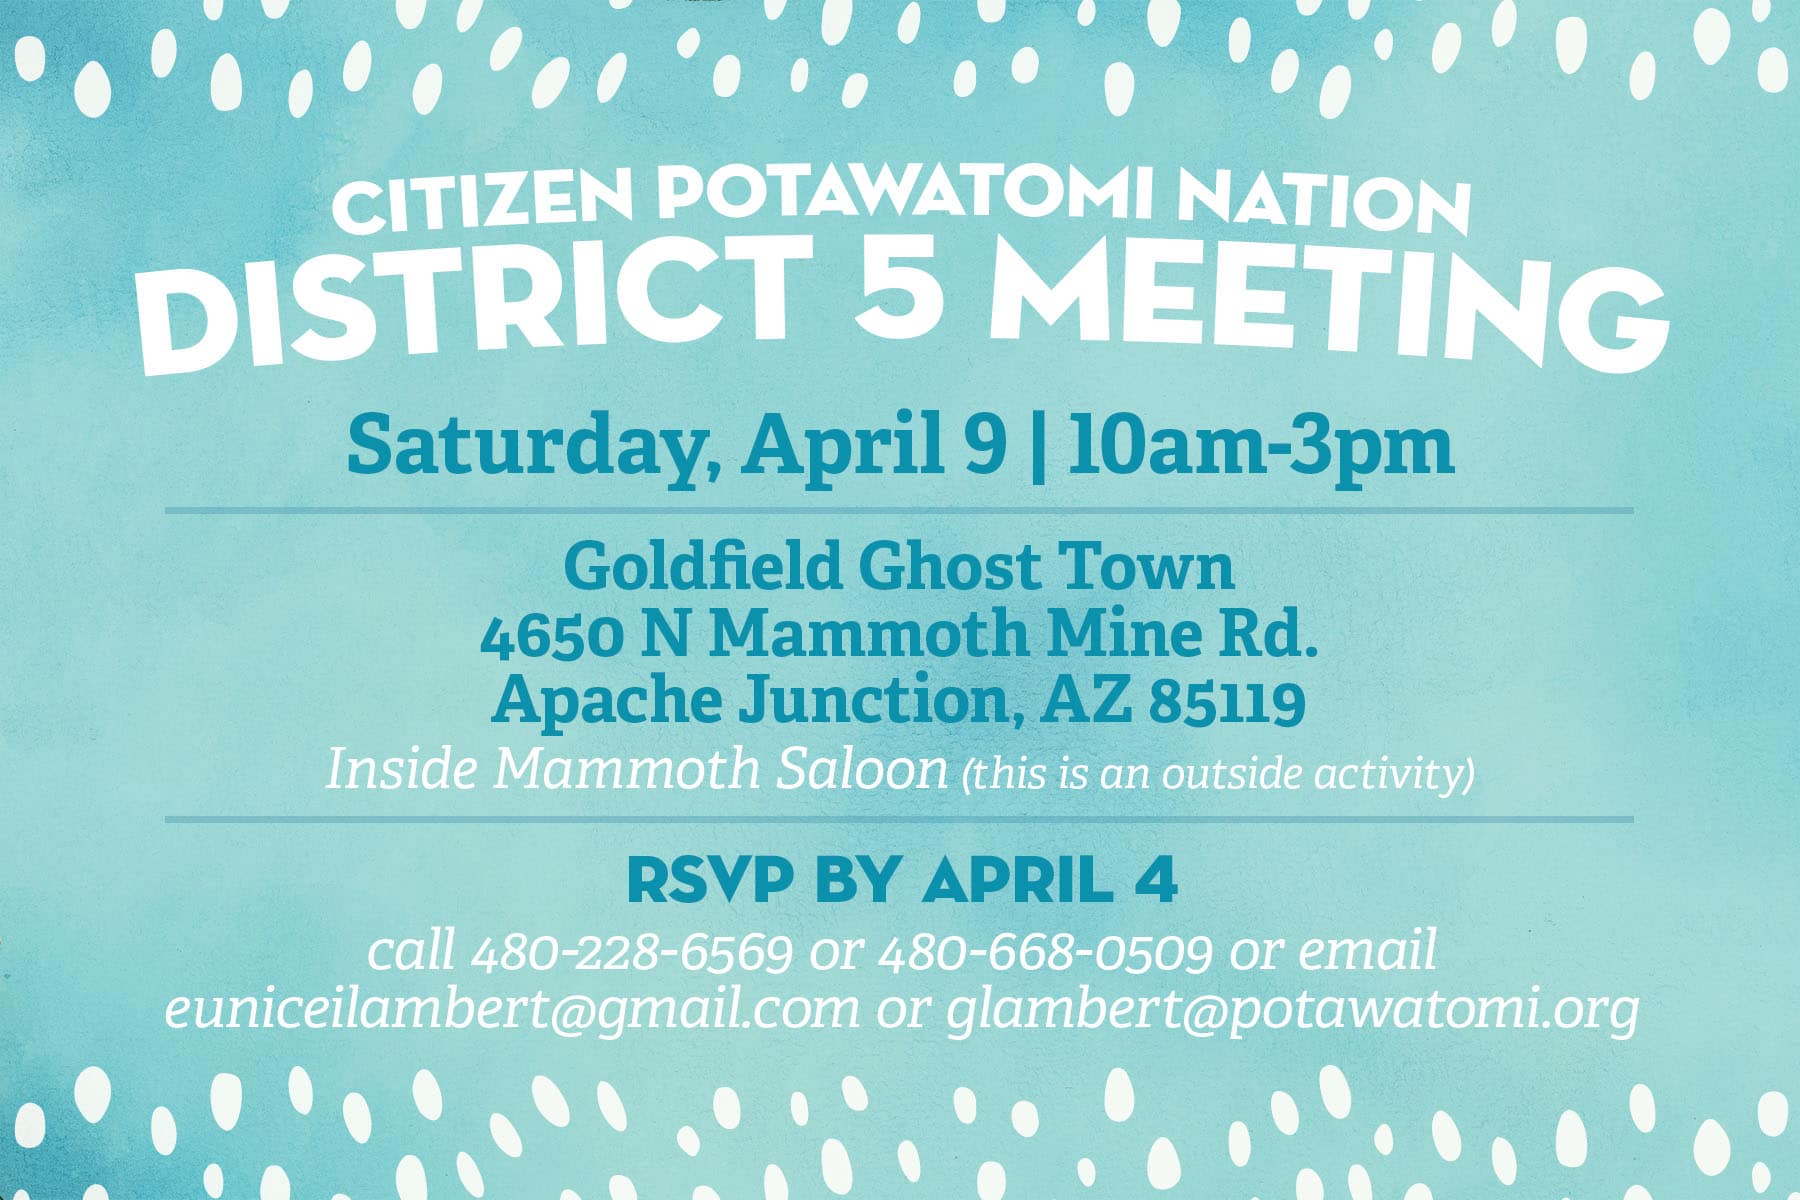 A teal watercolor postcard with white and blue text inviting CPN District 5 members to a spring meeting on Saturday, April 9, 2022 from 10am-3pm. The event will be held at Goldfield Ghost Town, 4650 North Mammoth Mine Road, Apache Junction, Arizona, 85119, at Mammoth Saloon. District 5 legislator Gene Lambert requests RSVP by April 4 at 480-228-6569 or glambert@potawatomi.org.